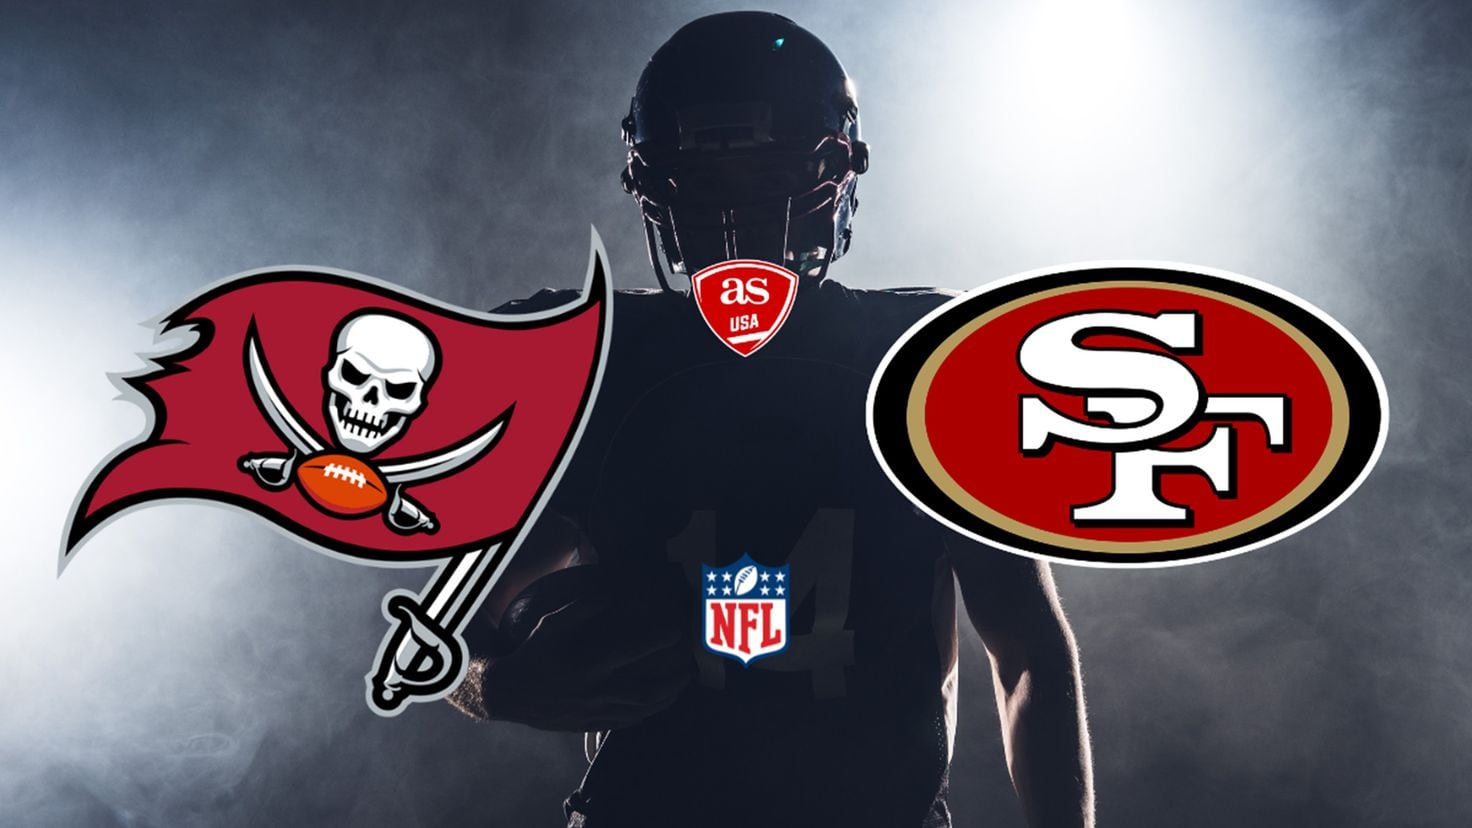 Buccaneers vs 49ers times, how to watch on TV, stream online NFL